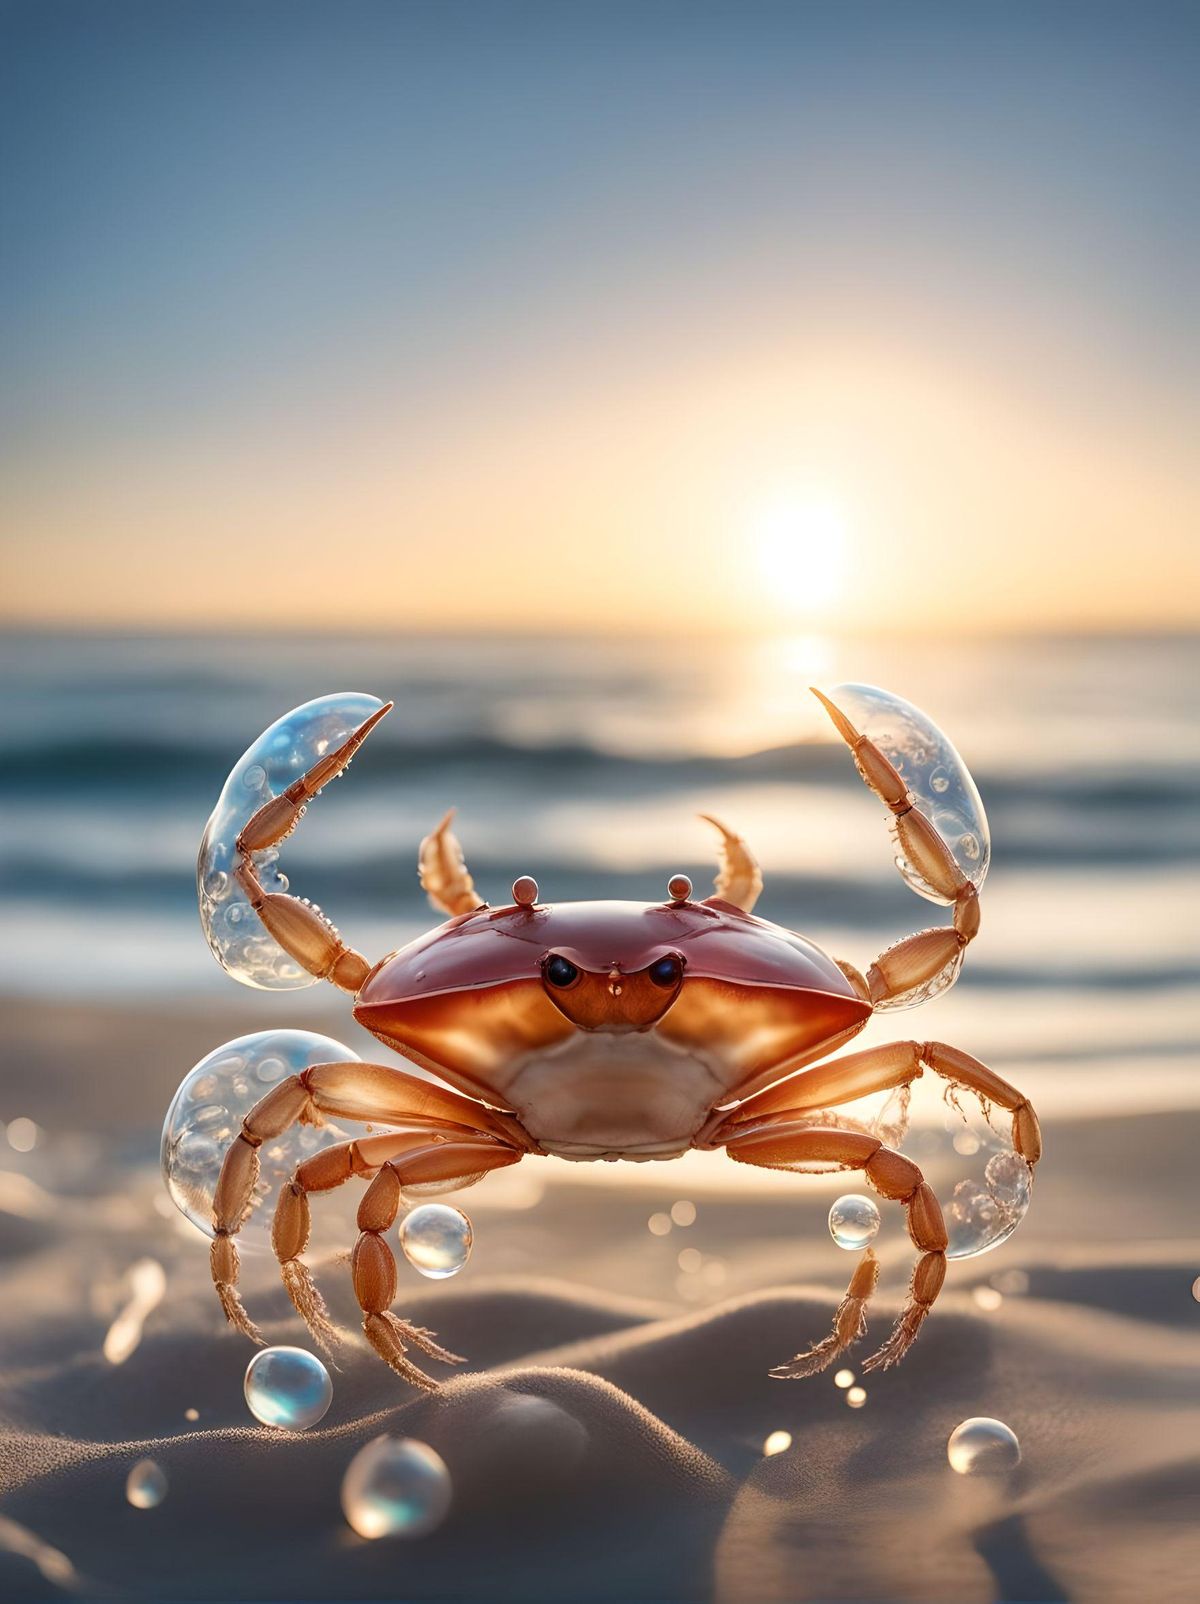 photorealistic fully transparent unusual crab completely made of soap bubbles, highly detailed, on the beach in front of the ocean, perfectly rendered
Lora: Aether_Bubbles_And_Foam_v1_SDXL_LoRA", "weight": 0.62